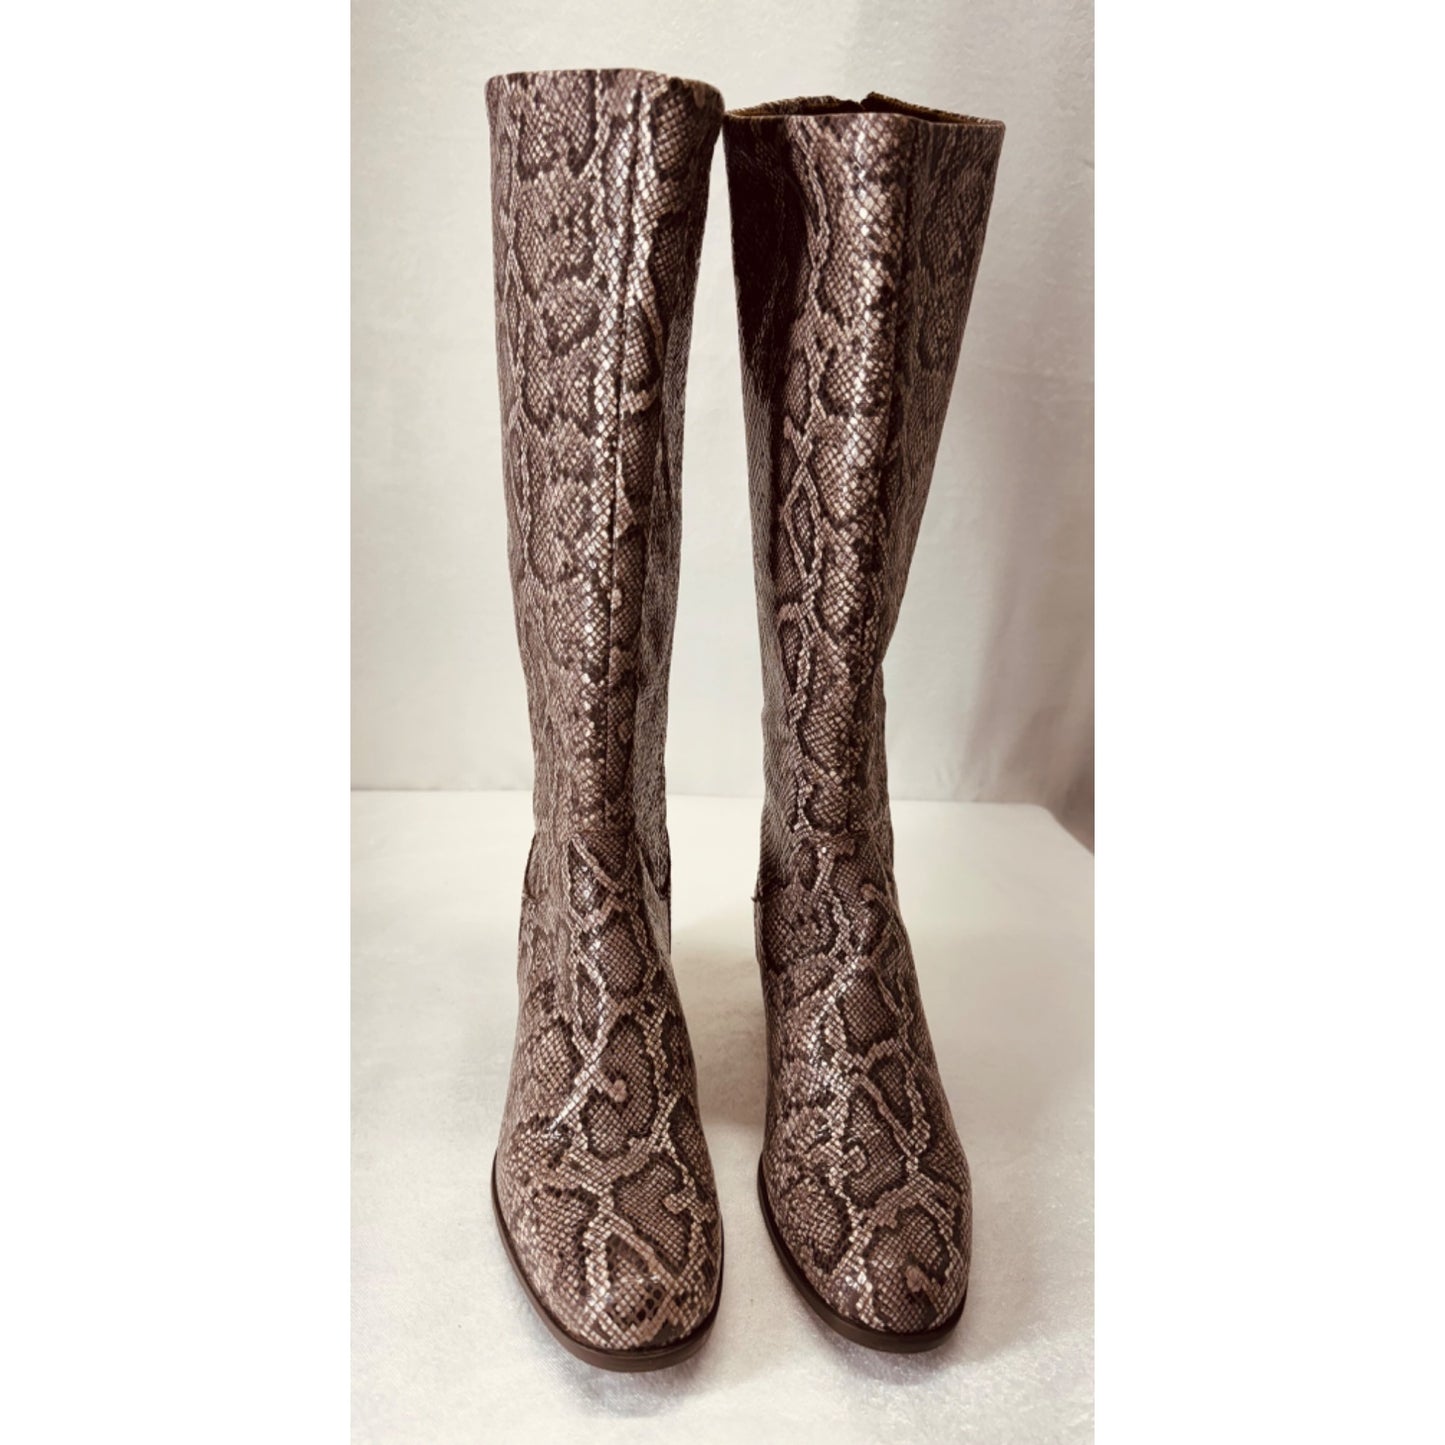 Born Womens Audrina Color: Brown Snake Print Style: F70257 Size 7